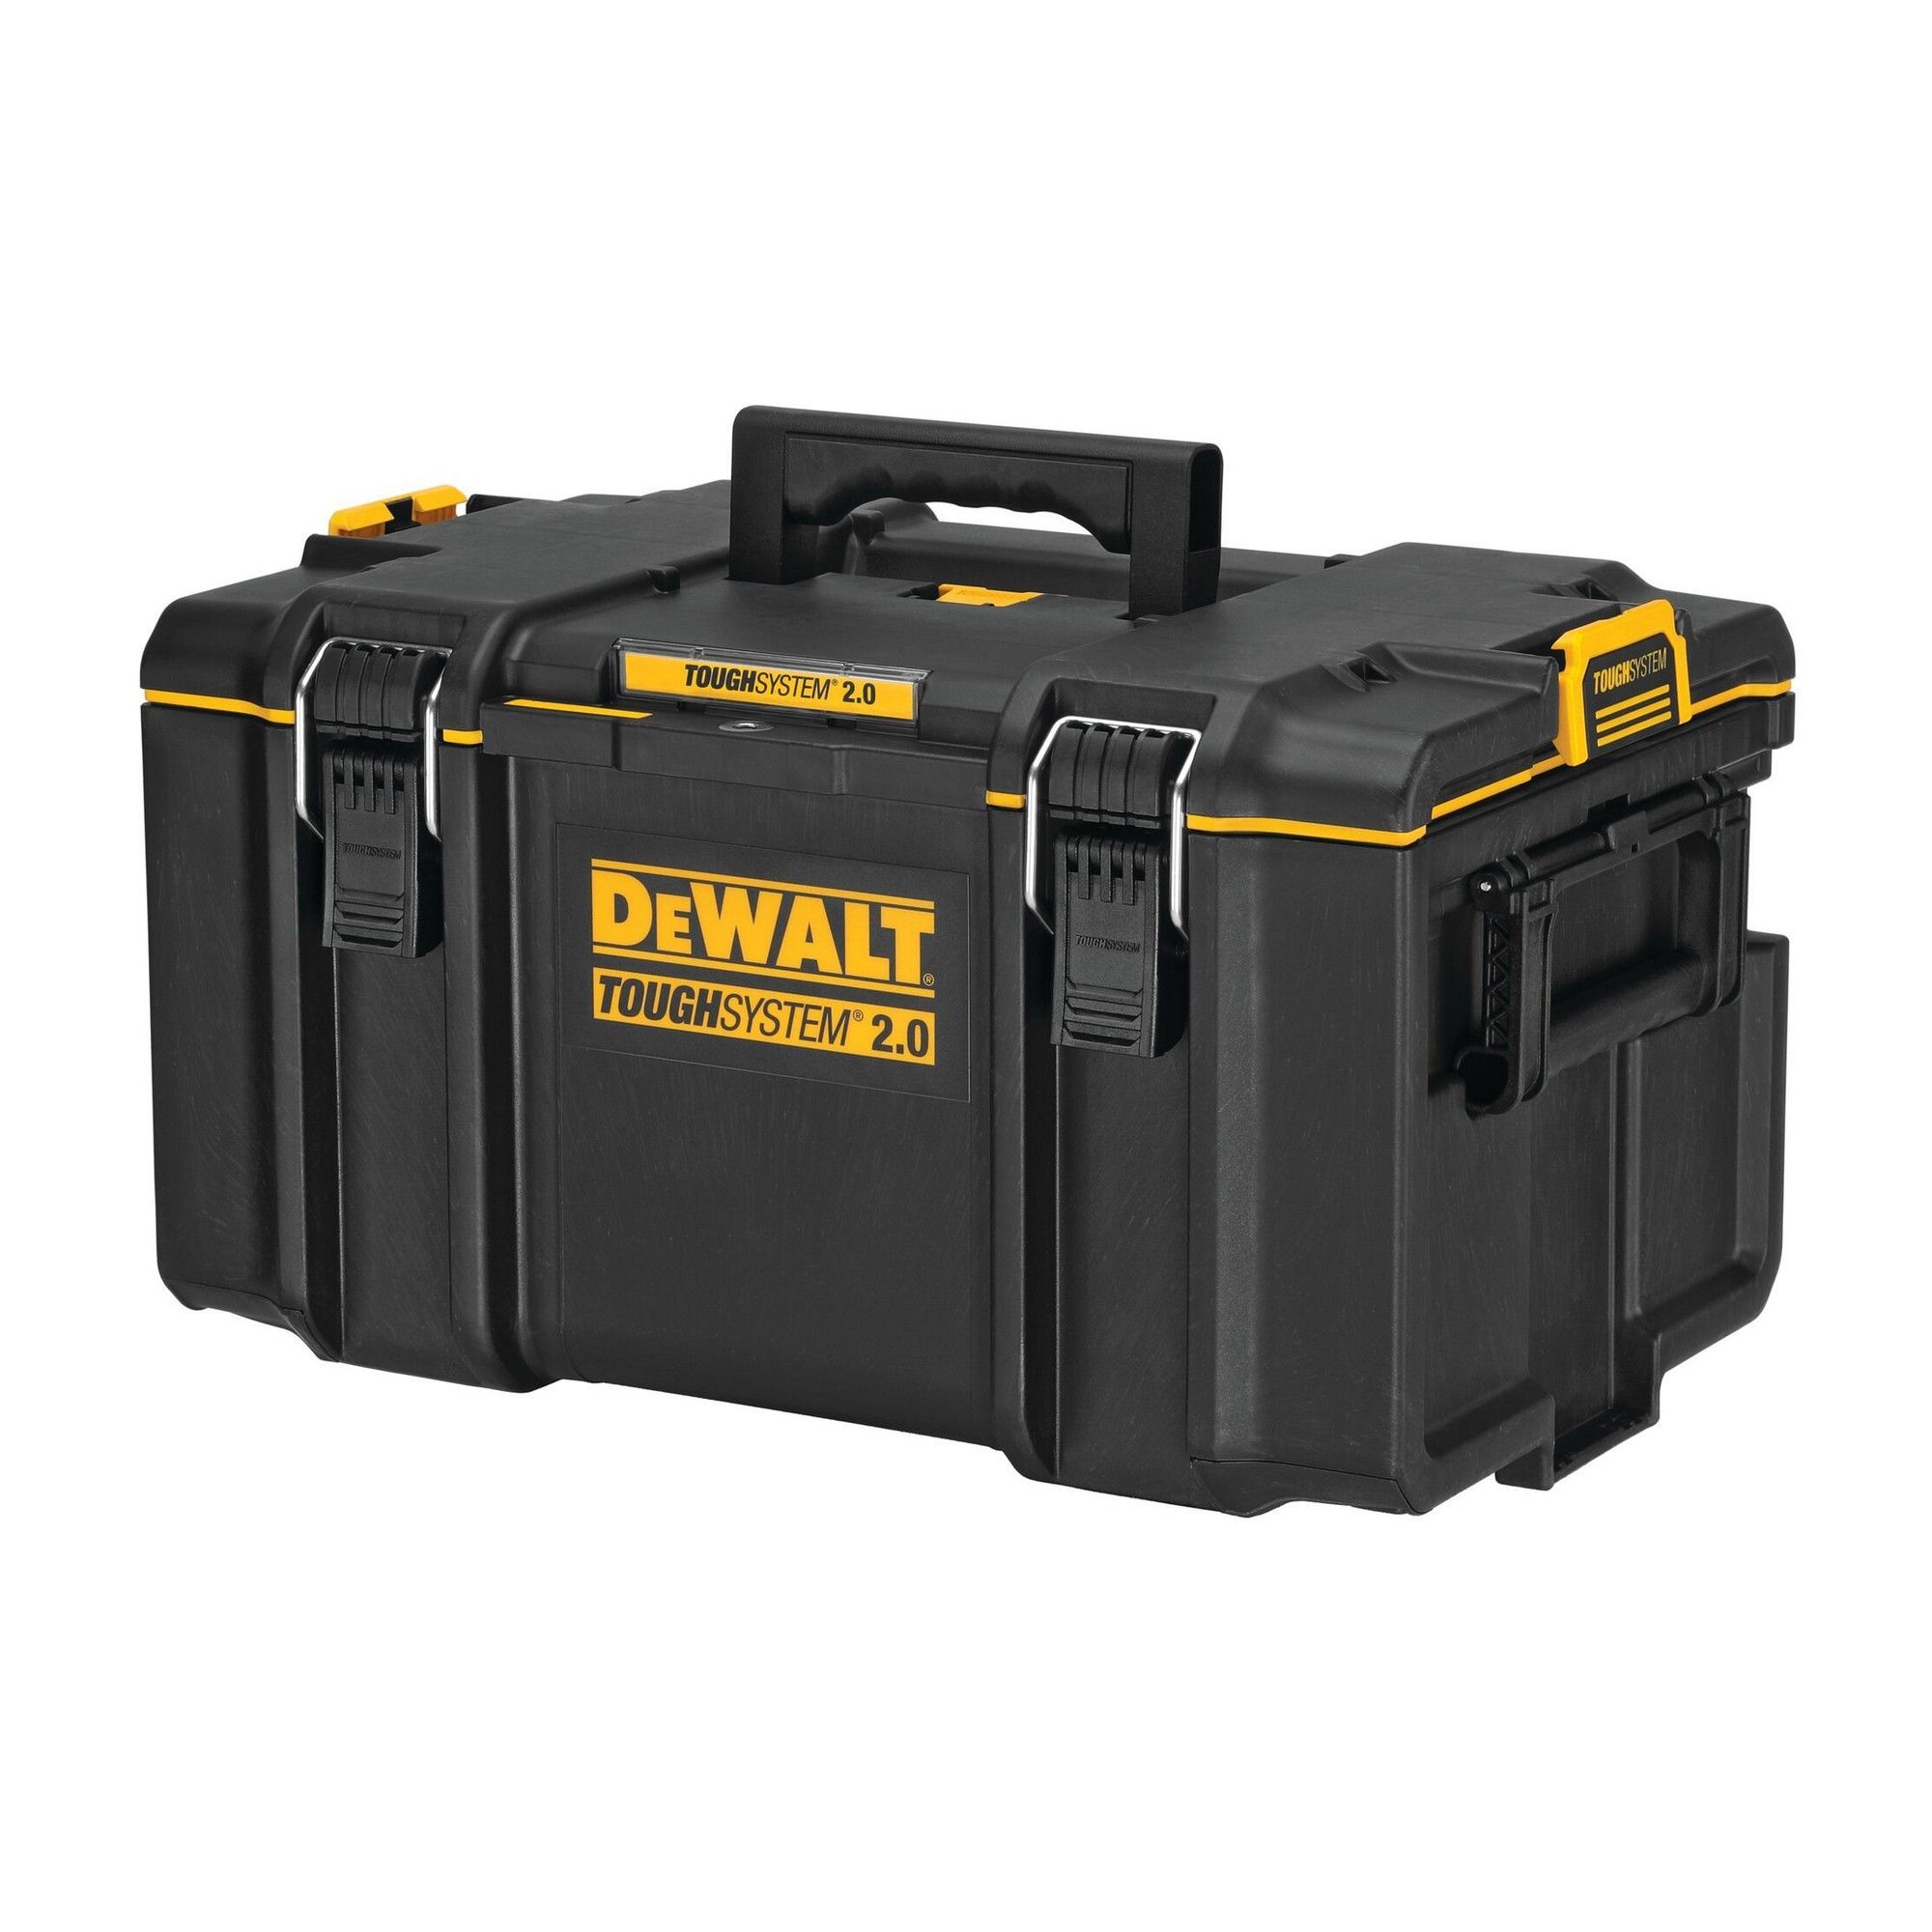 Toolbox - ToughSystem 2.0 - Large from DEWALT